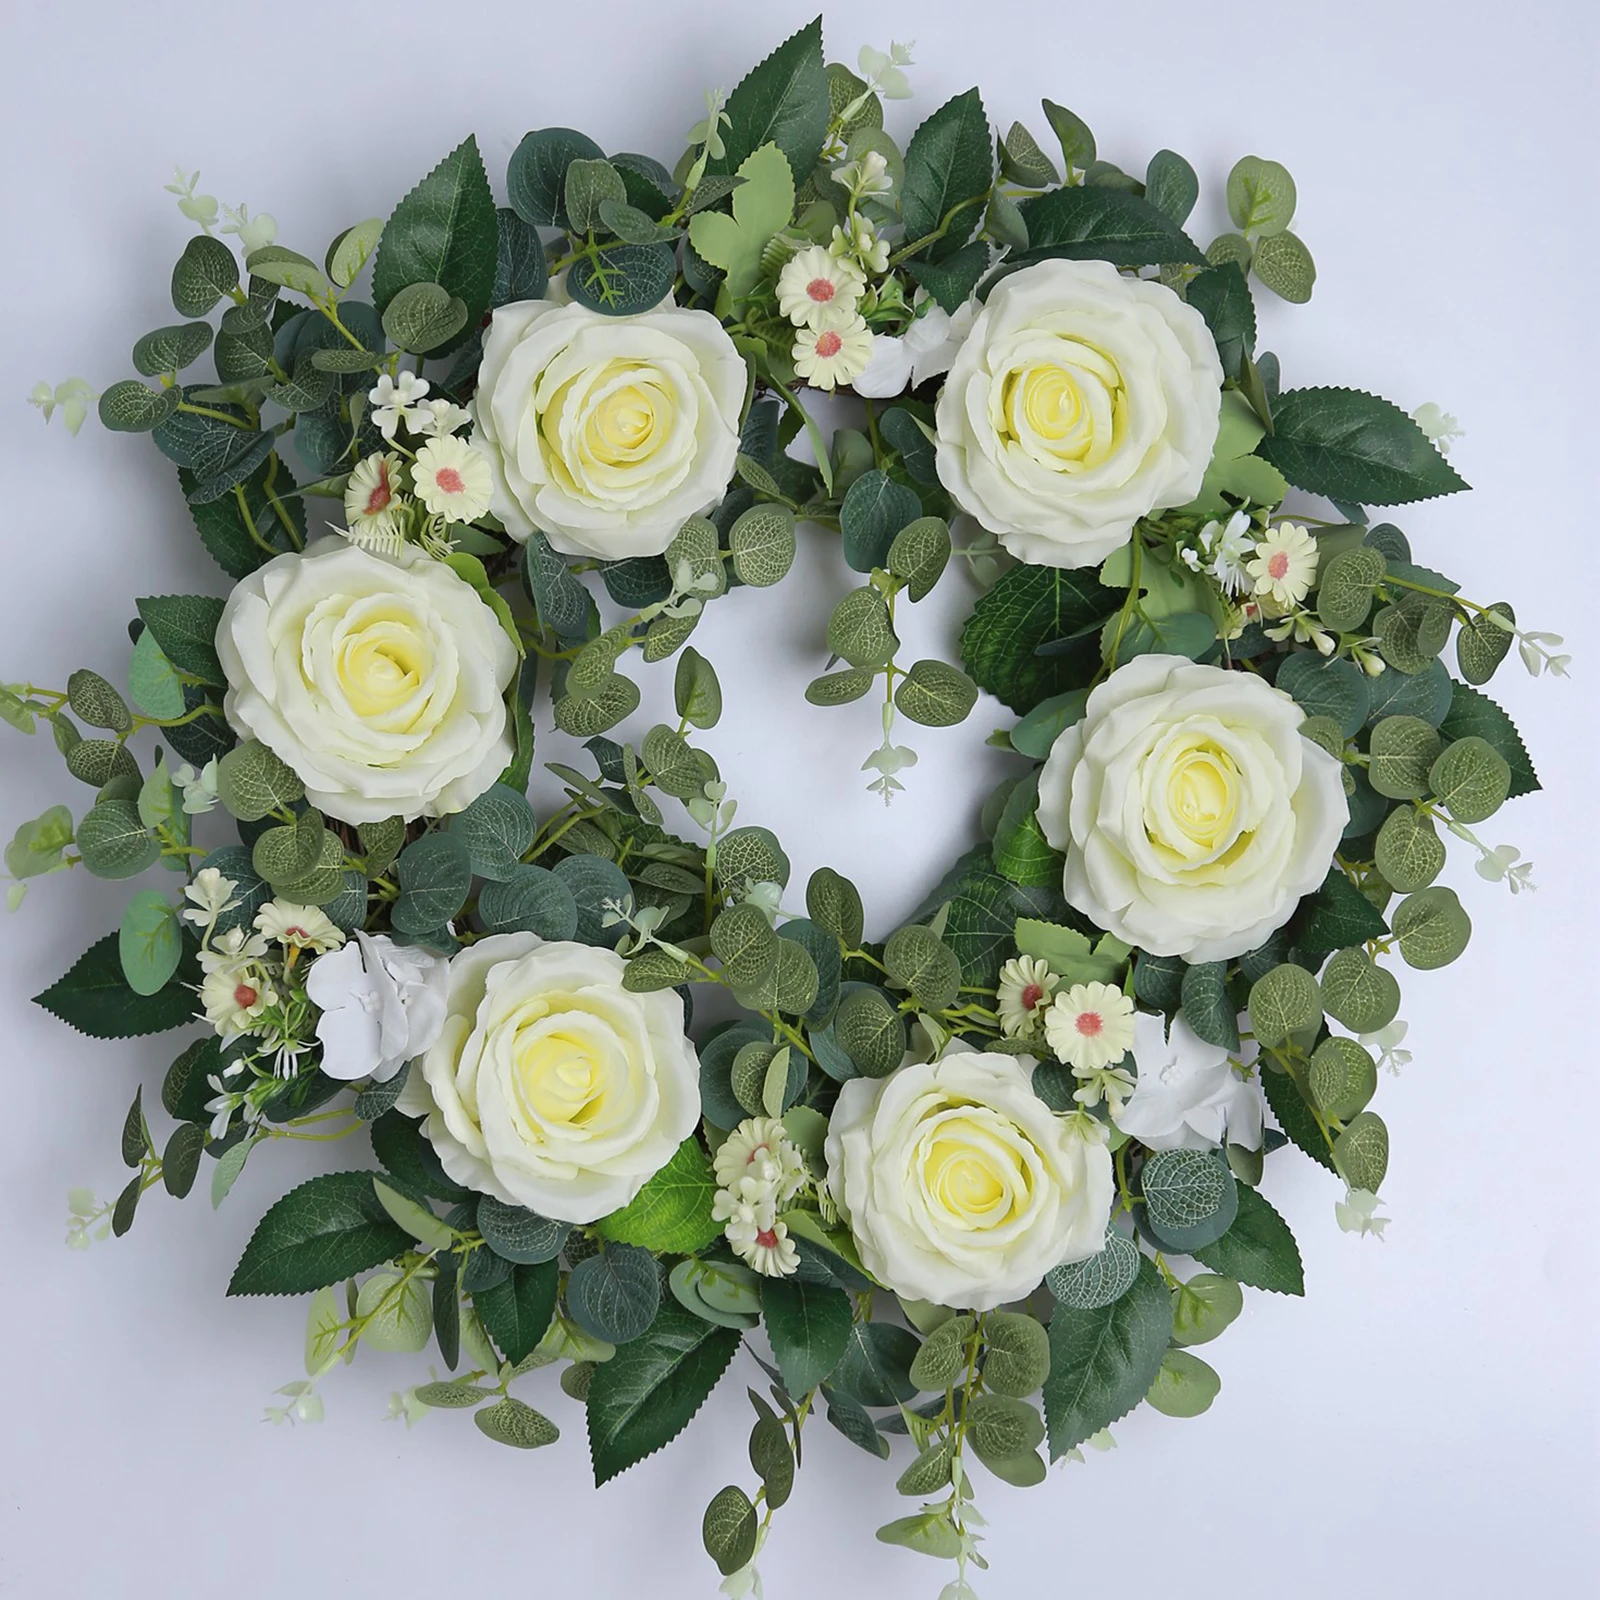 Artificial Eucalyptus Wreath Leaves Holiday Festival Door Hanging Garland Party Decoration for Door Wall Window